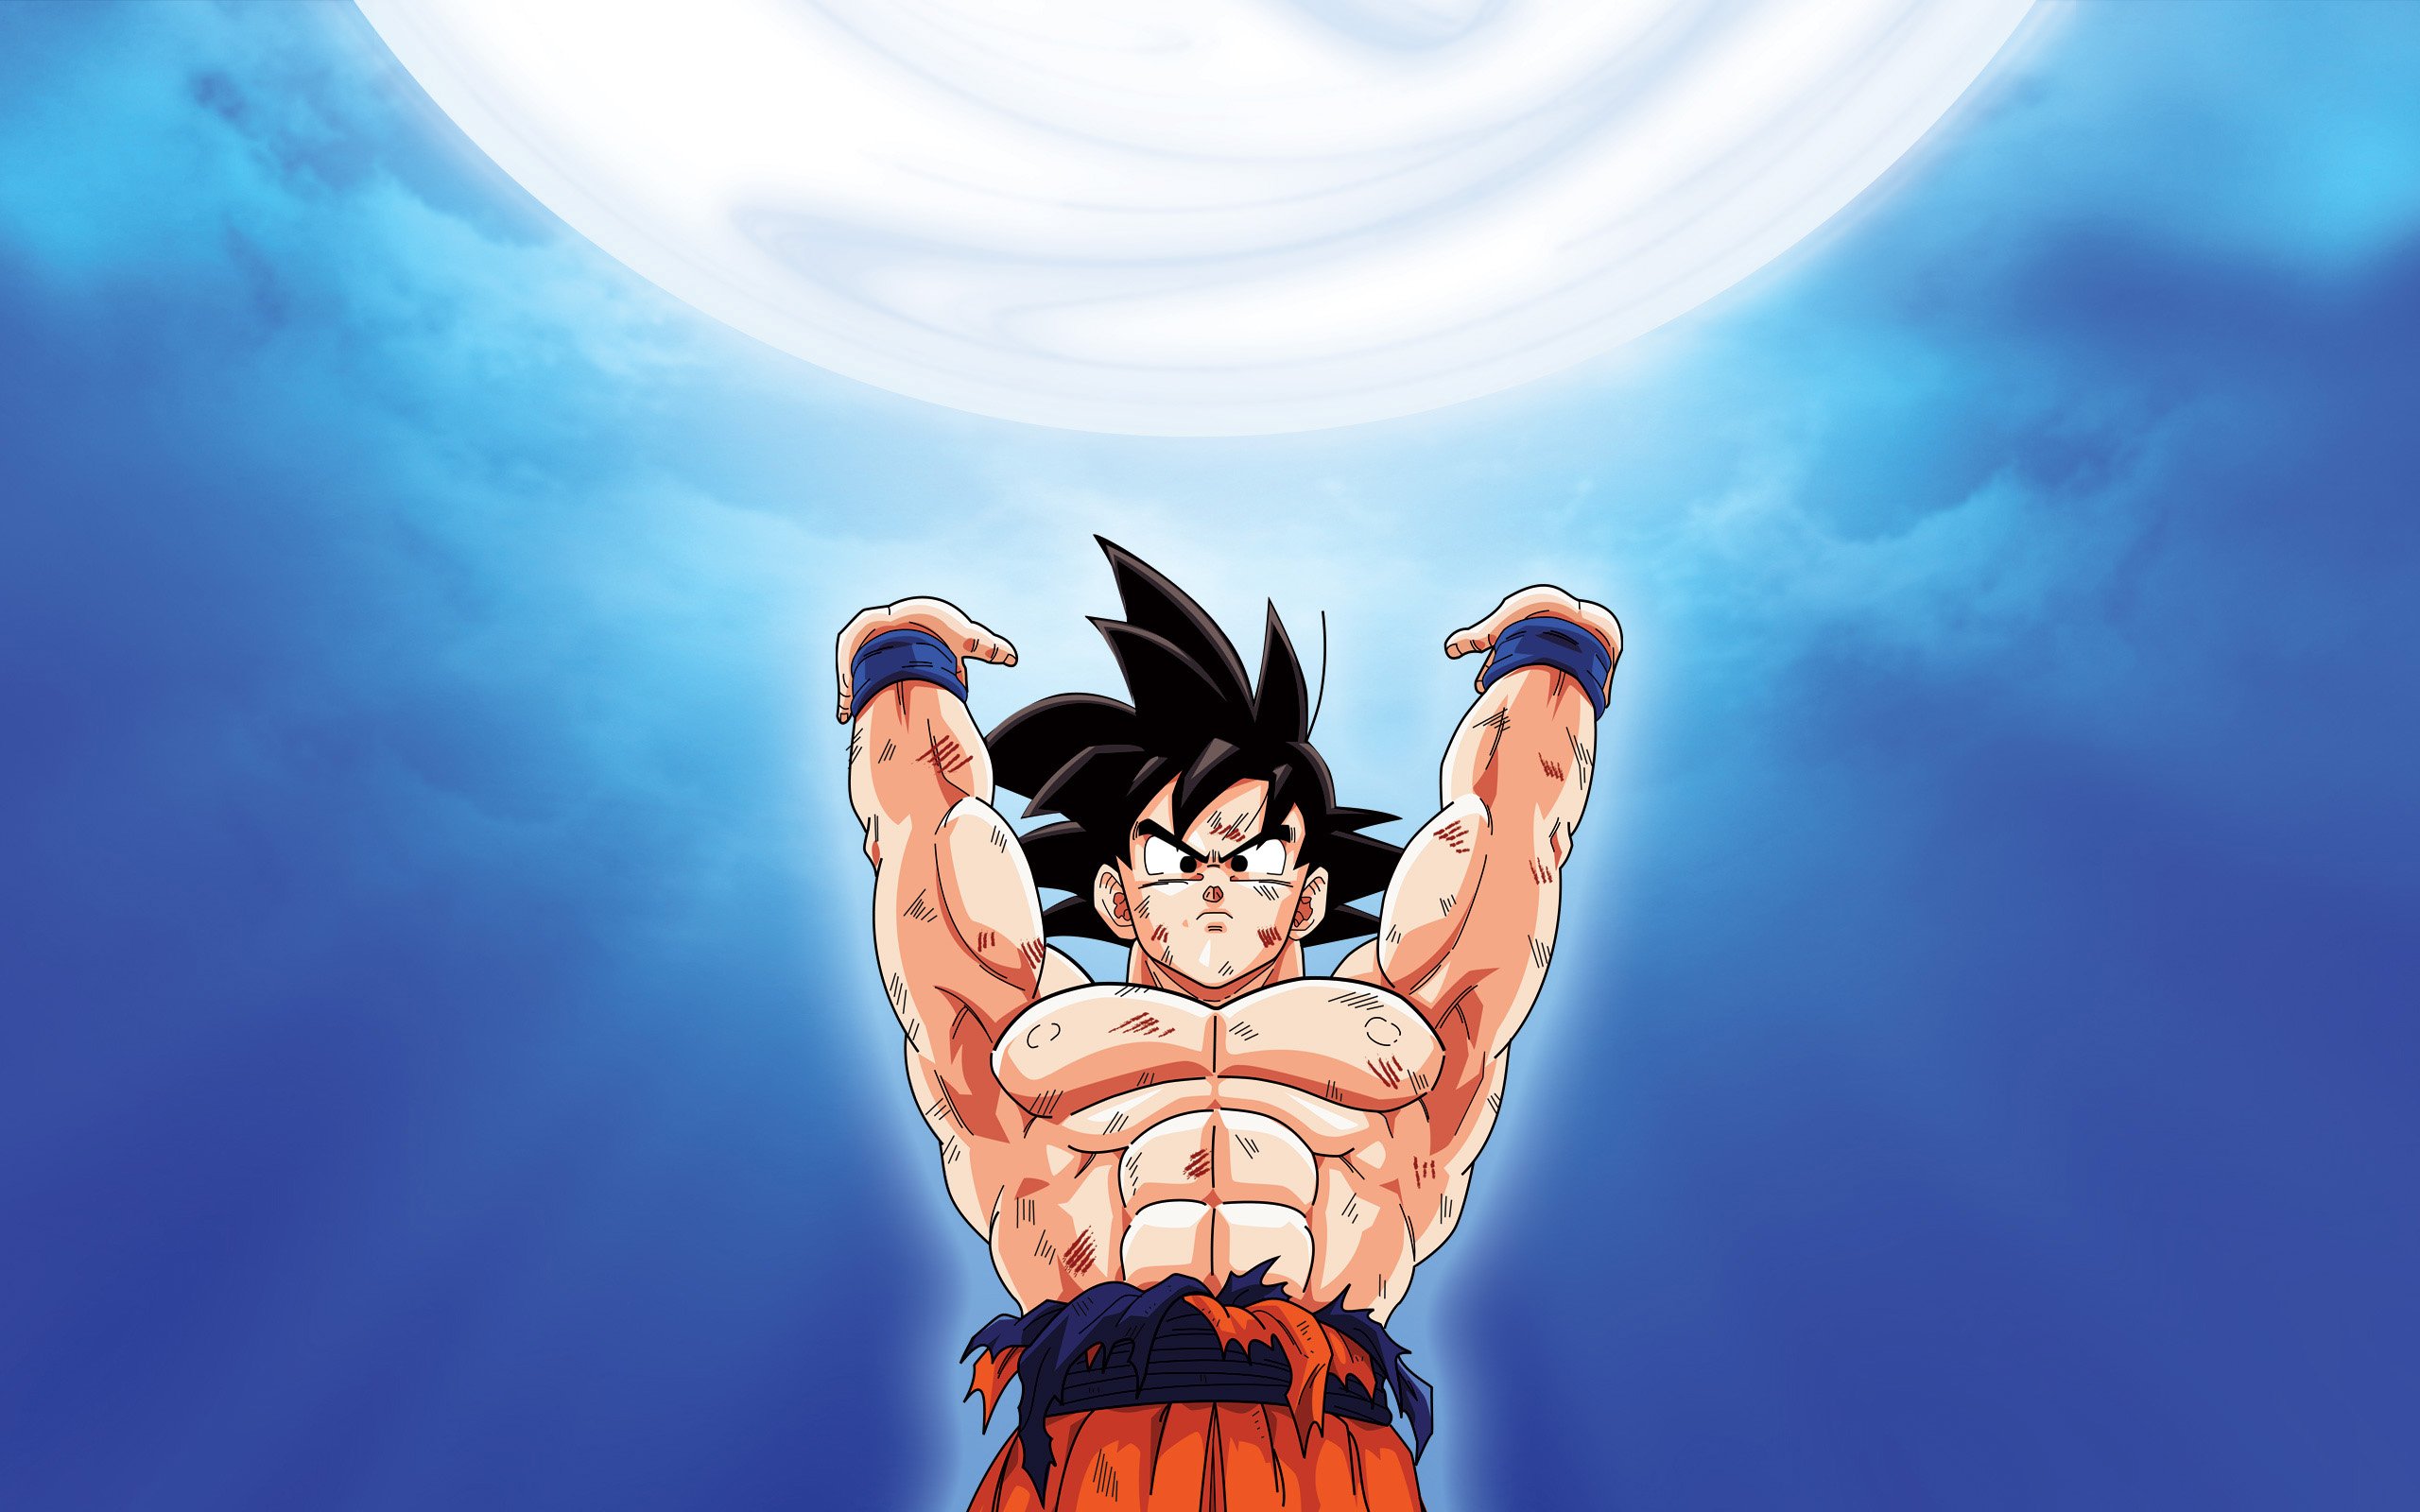 Dragon ball z iphone wallpaper (51 Wallpapers) – Funny Pictures